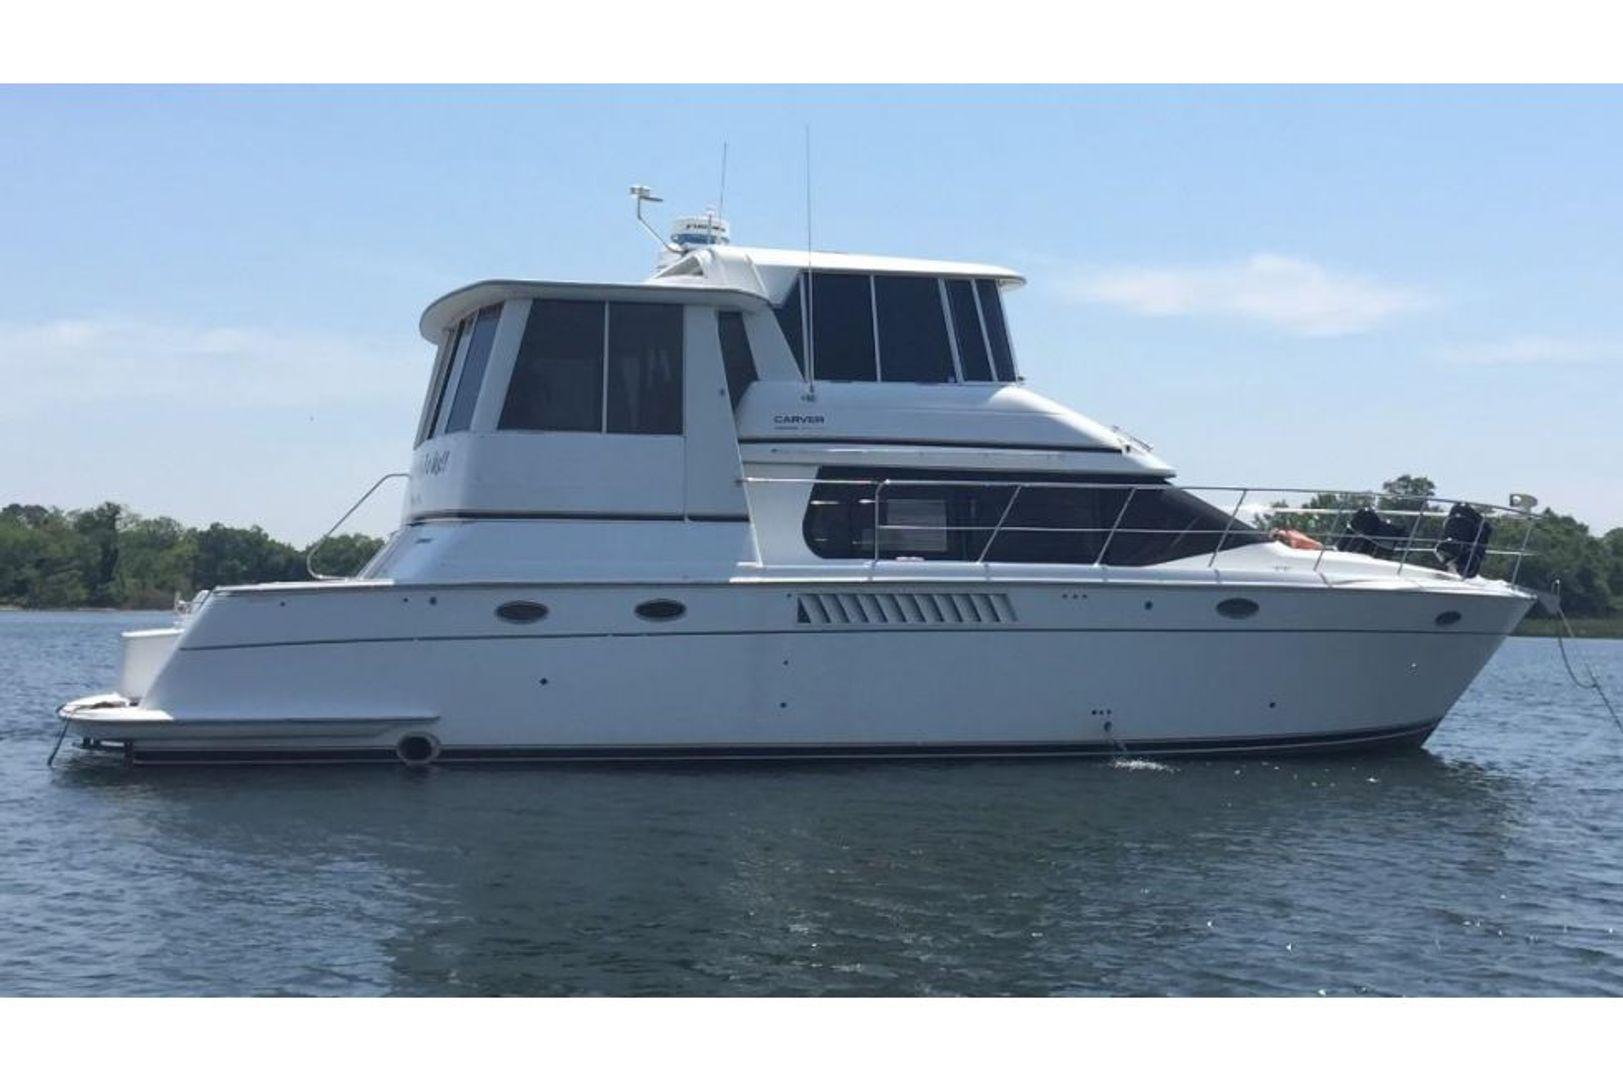 Our Carver 504 Aft Cabin Motor Yacht (ACMY) 